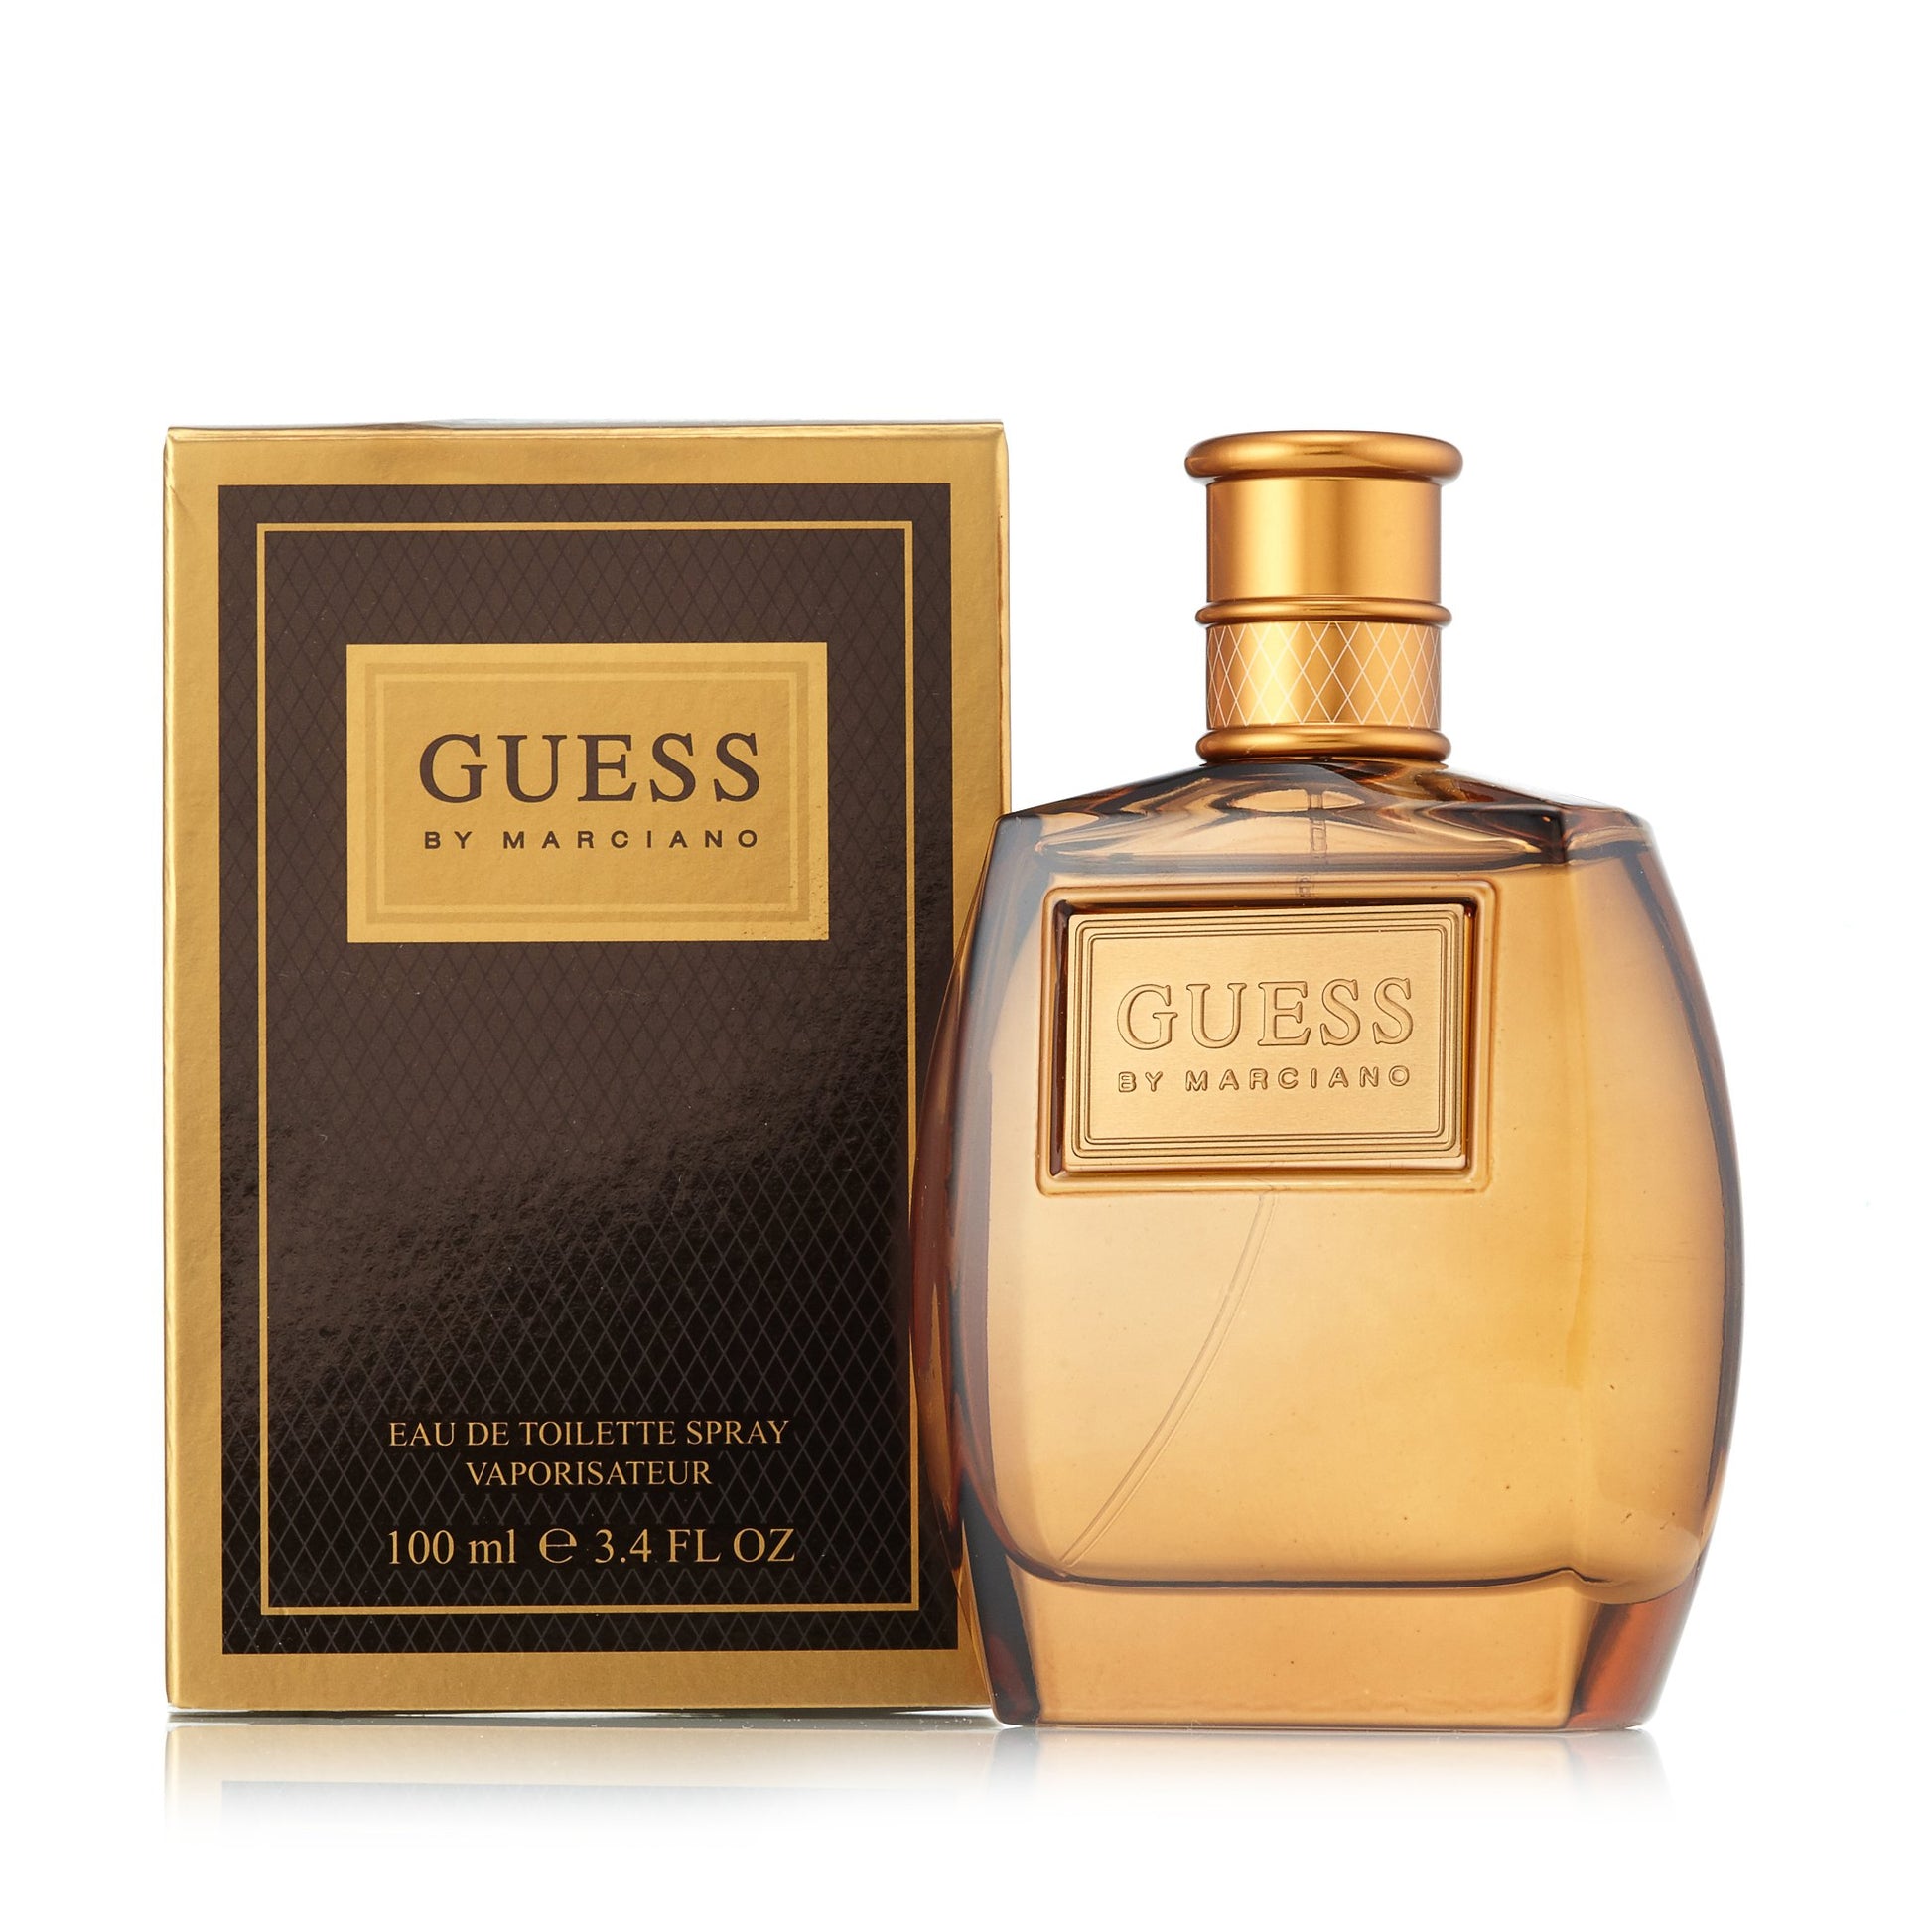 Guess by Marciano Eau de Toilette Spray for Men by Guess, Product image 1